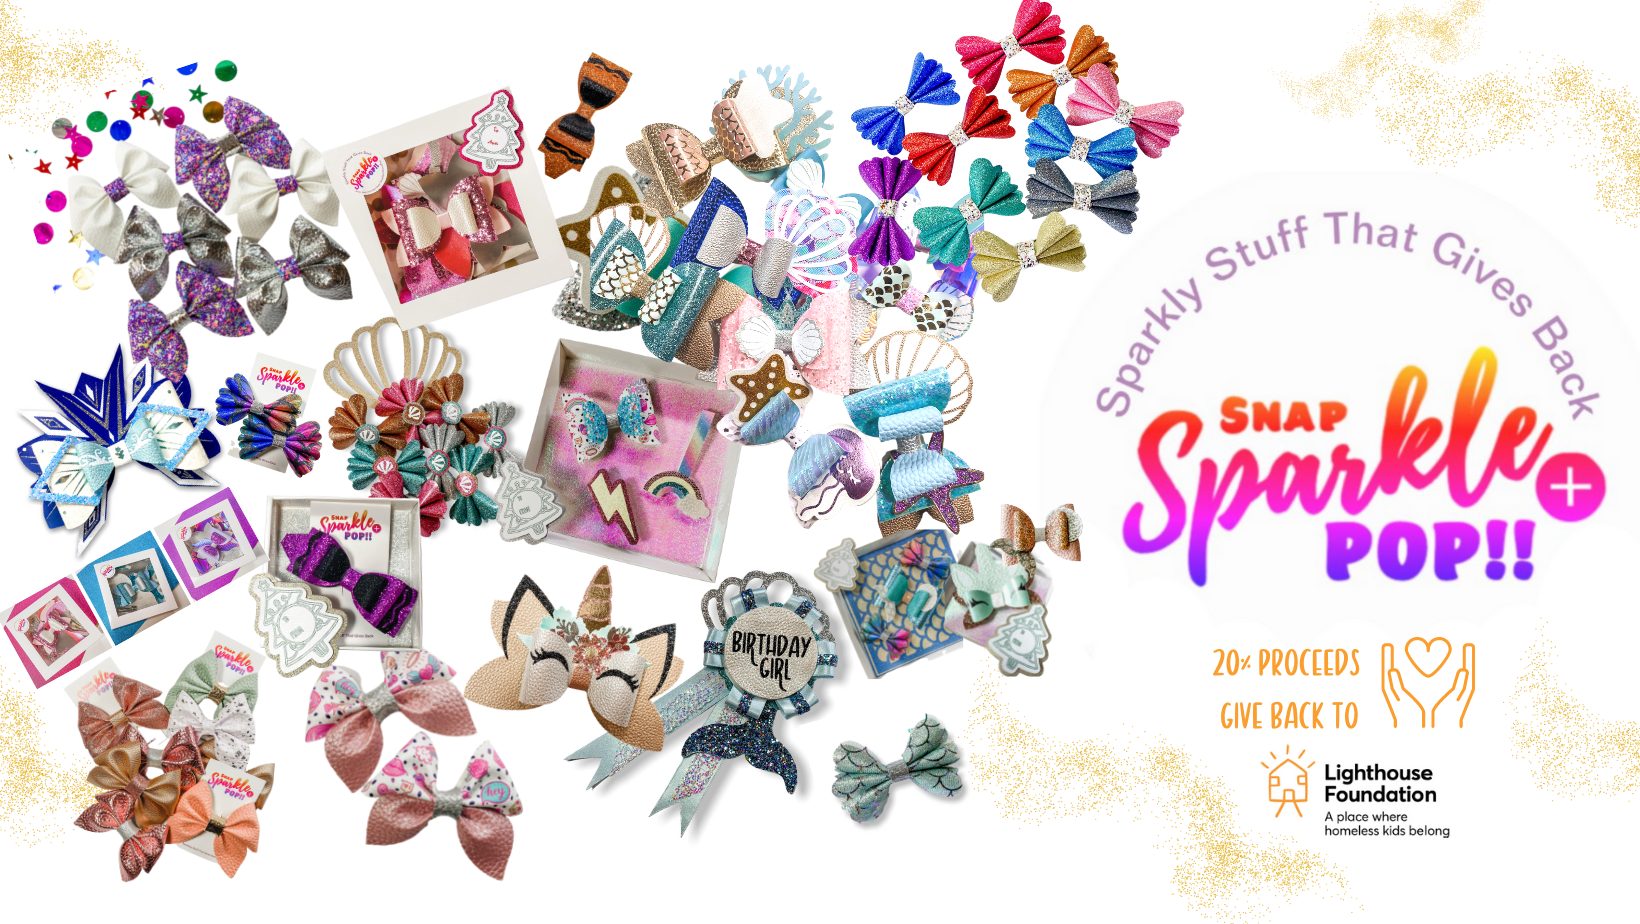 Snap Sparkle  + Pop!! Sparkly Stuff That Gives Back